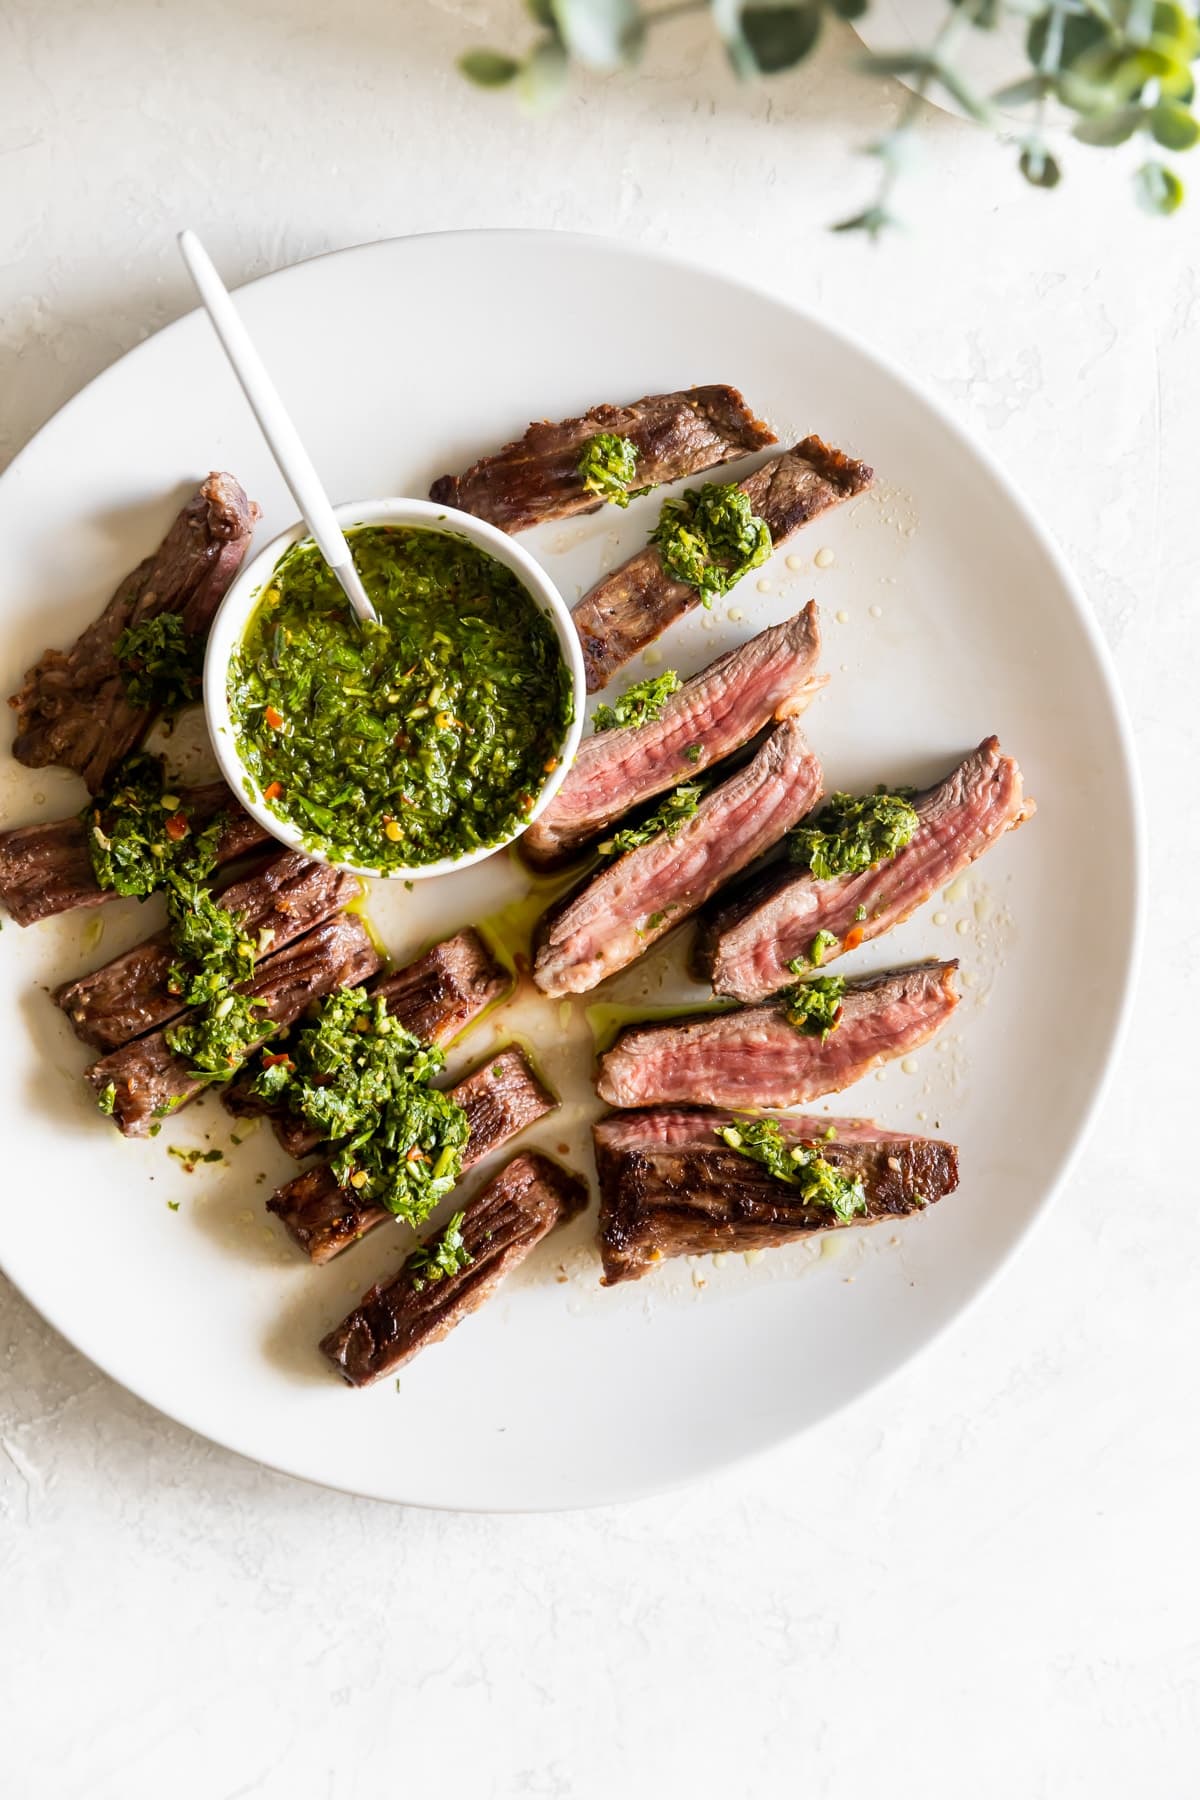 How to Grill Churrasco Steak with Chimichurri Sauce - A Sassy Spoon